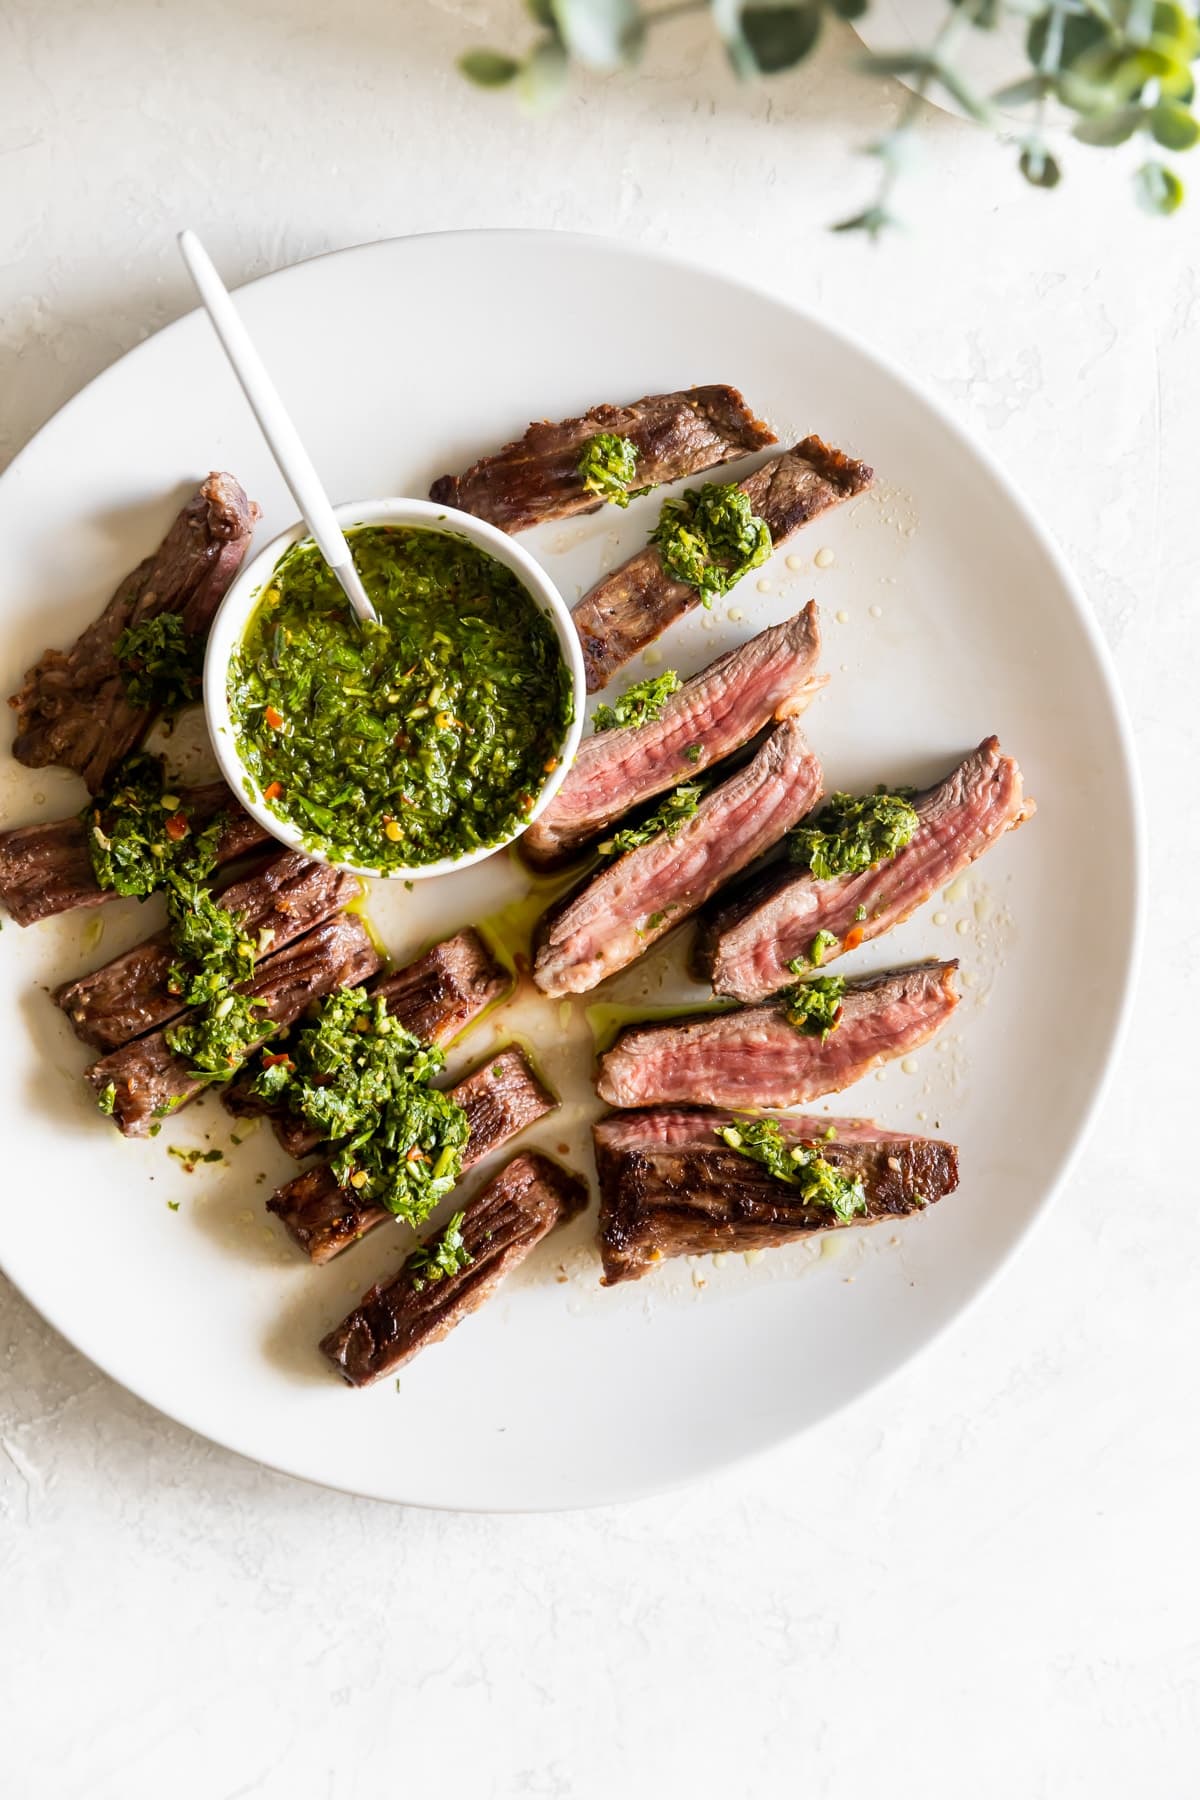 How to Grill Churrasco Steak with Chimichurri Sauce - A Sassy Spoon